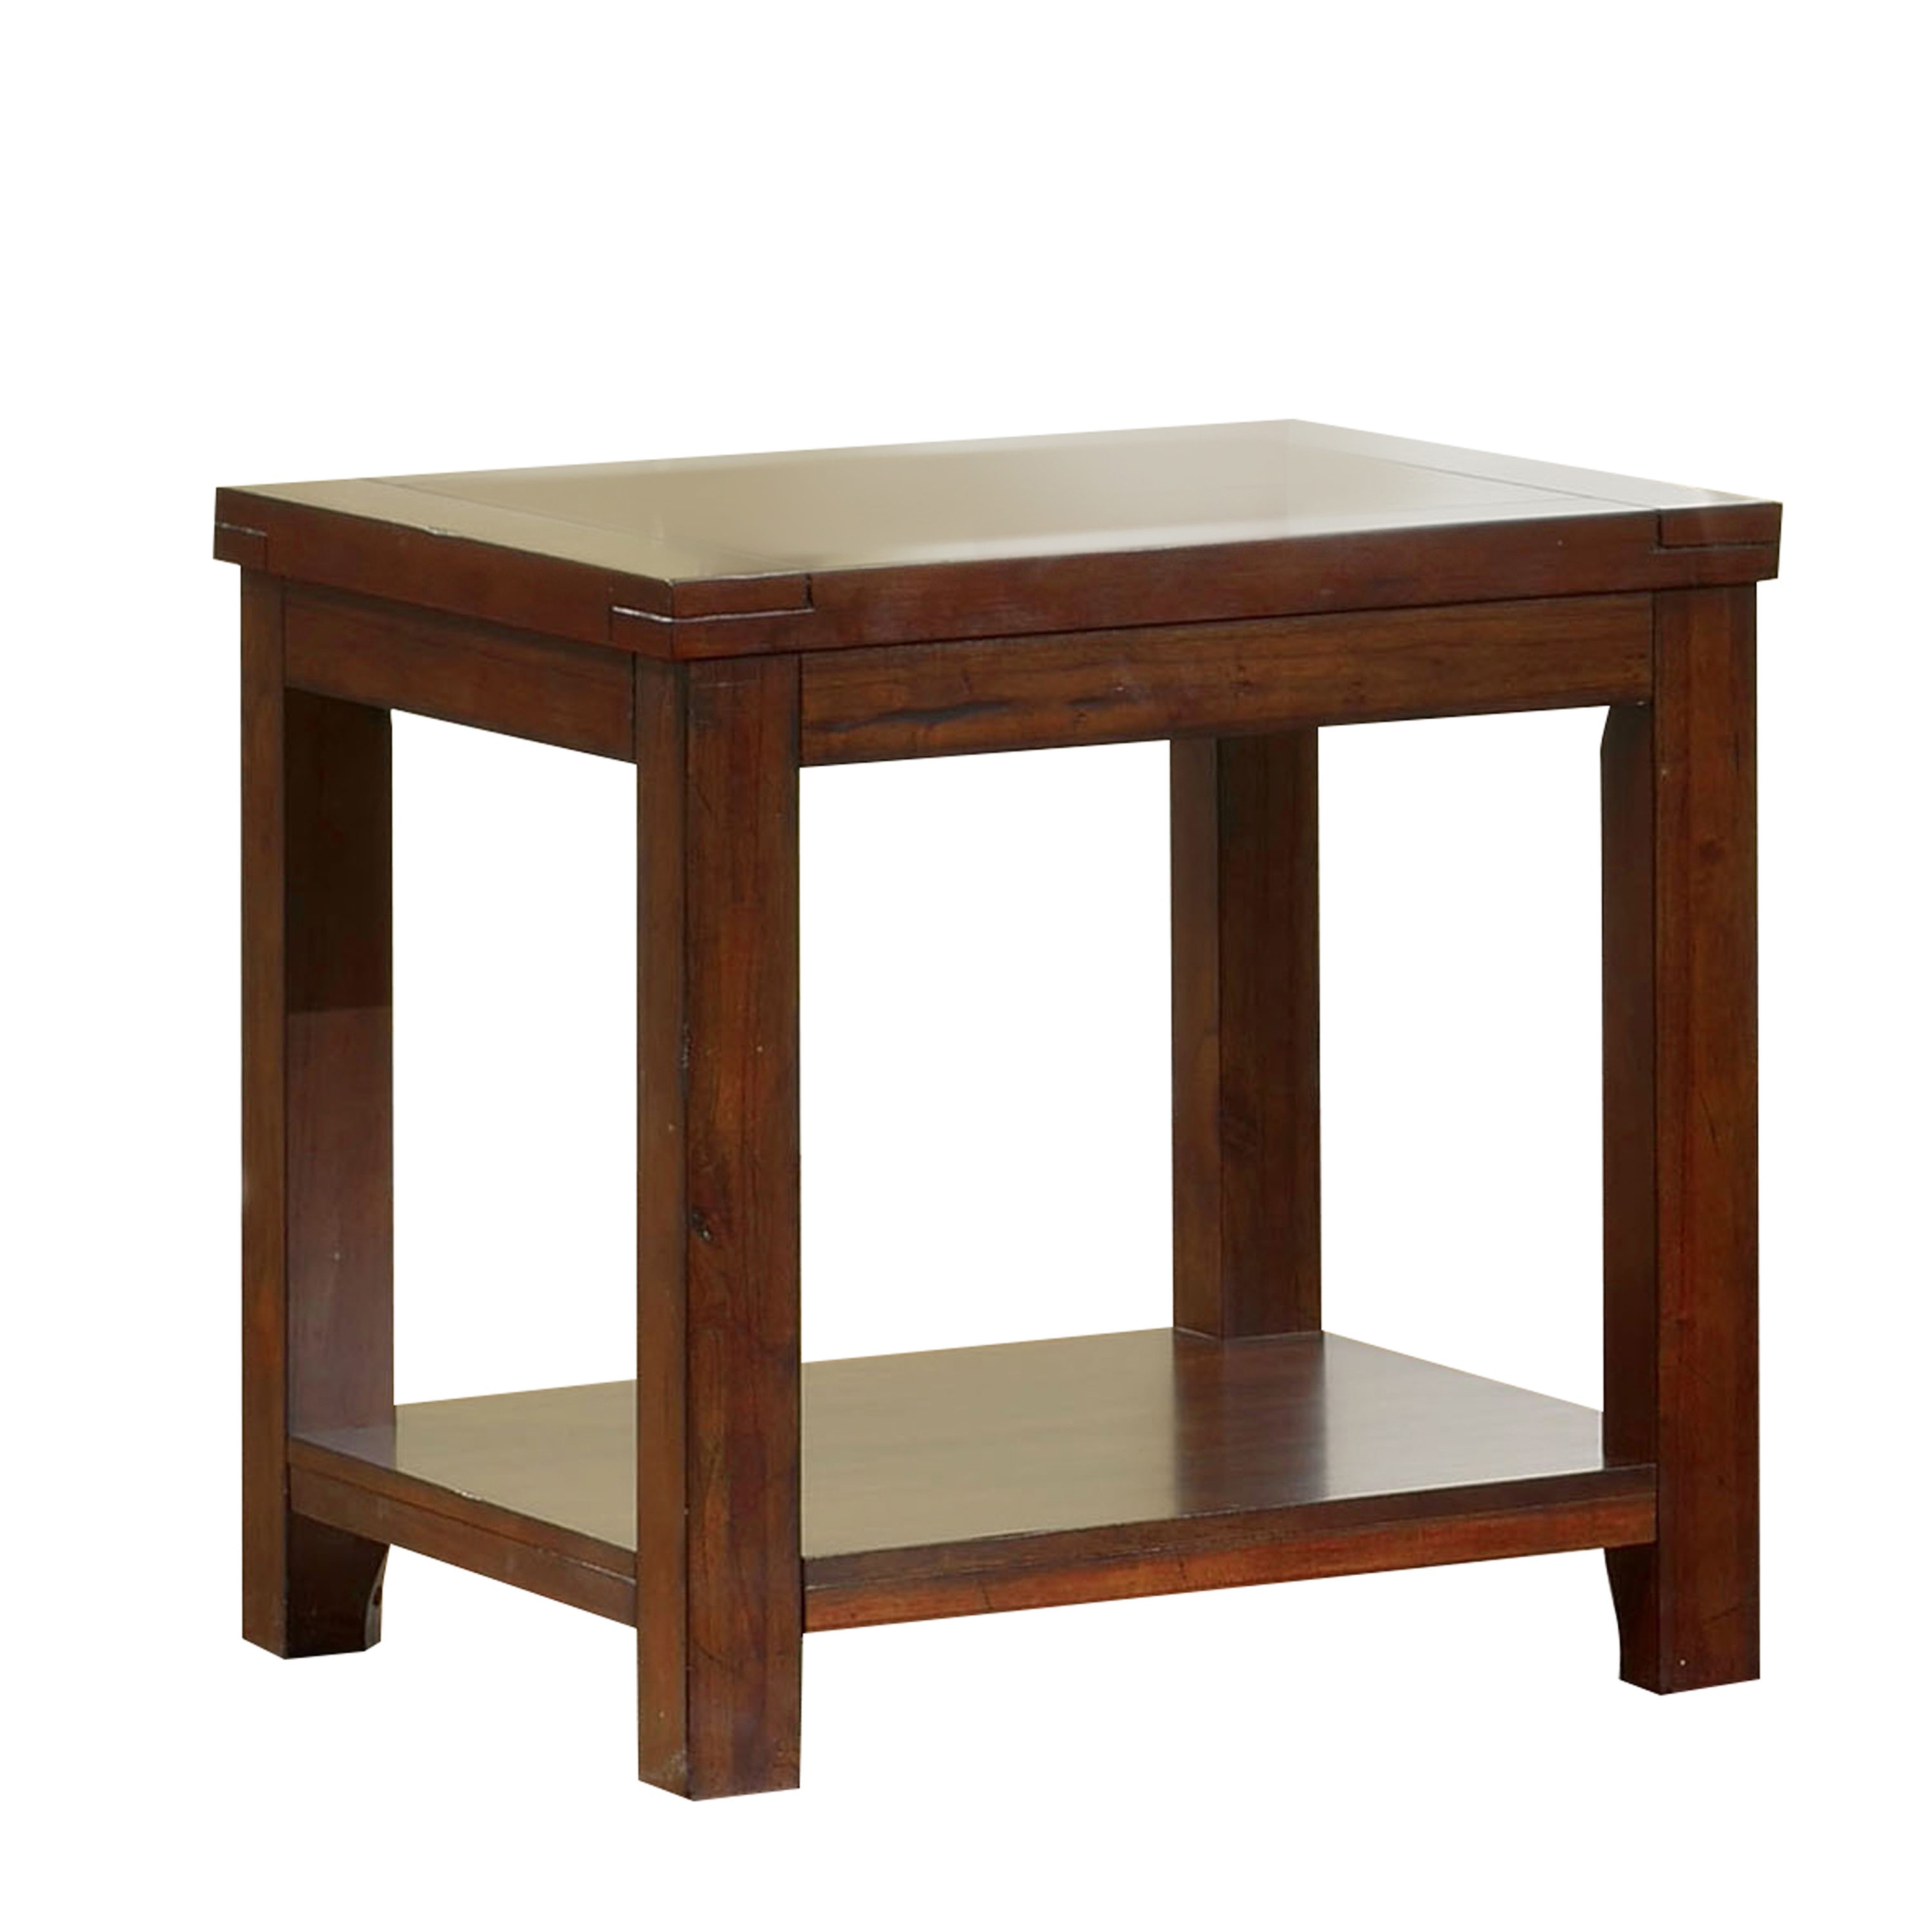 Fayette 23.5-in W x 24-in H Dark Cherry Wood Farmhouse End Table with Storage Assembly Required in Brown | - Furniture of America IDF-4107E